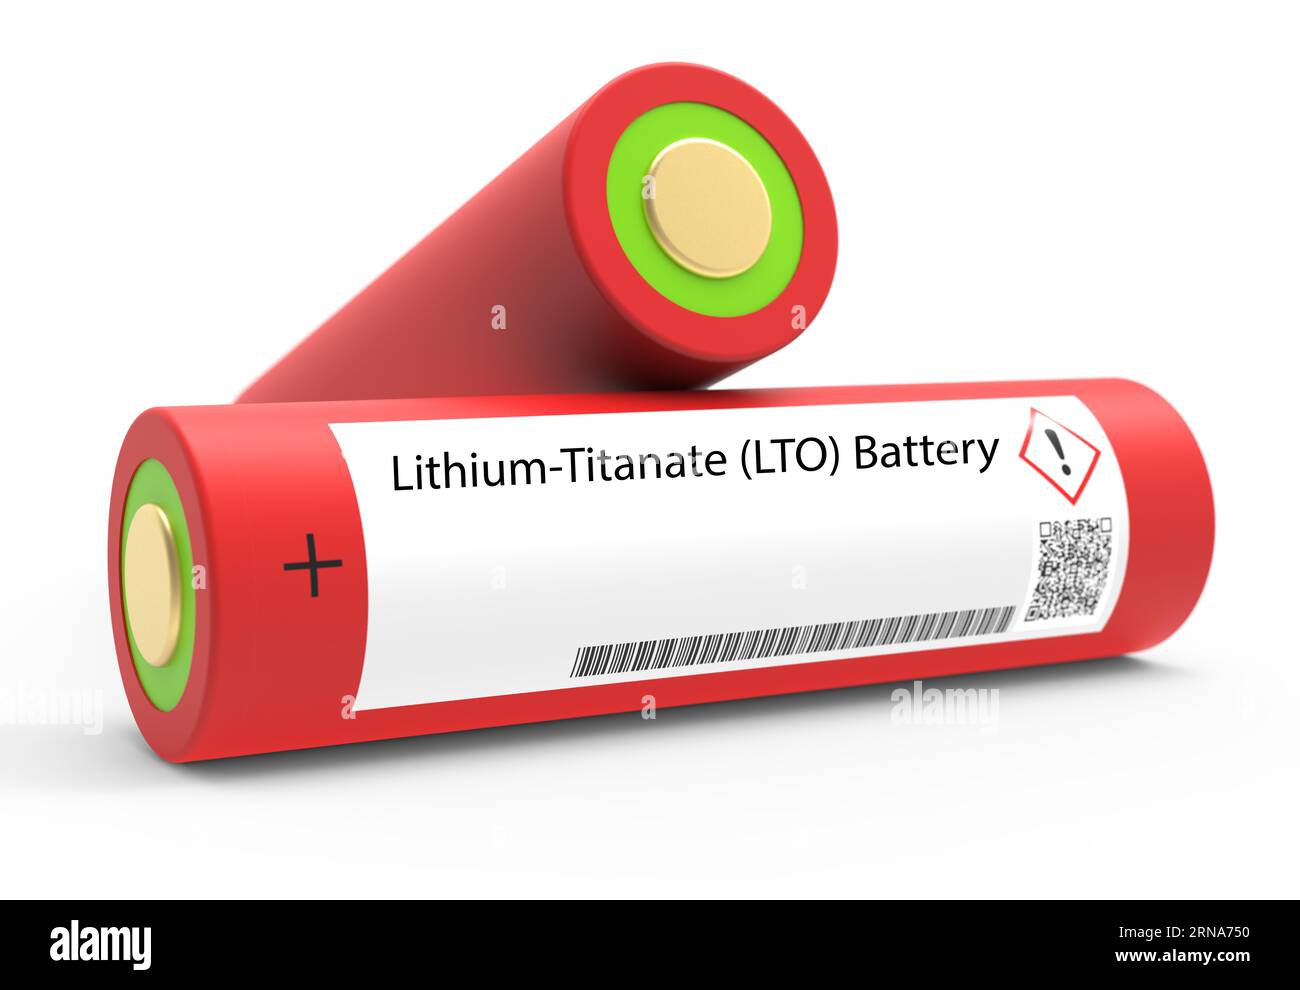 Lithium-titanate (LTO) Battery A lithium-titanate battery is a type of Li-ion  battery commonly used in electric vehicles and renewable energy systems  Stock Photo - Alamy